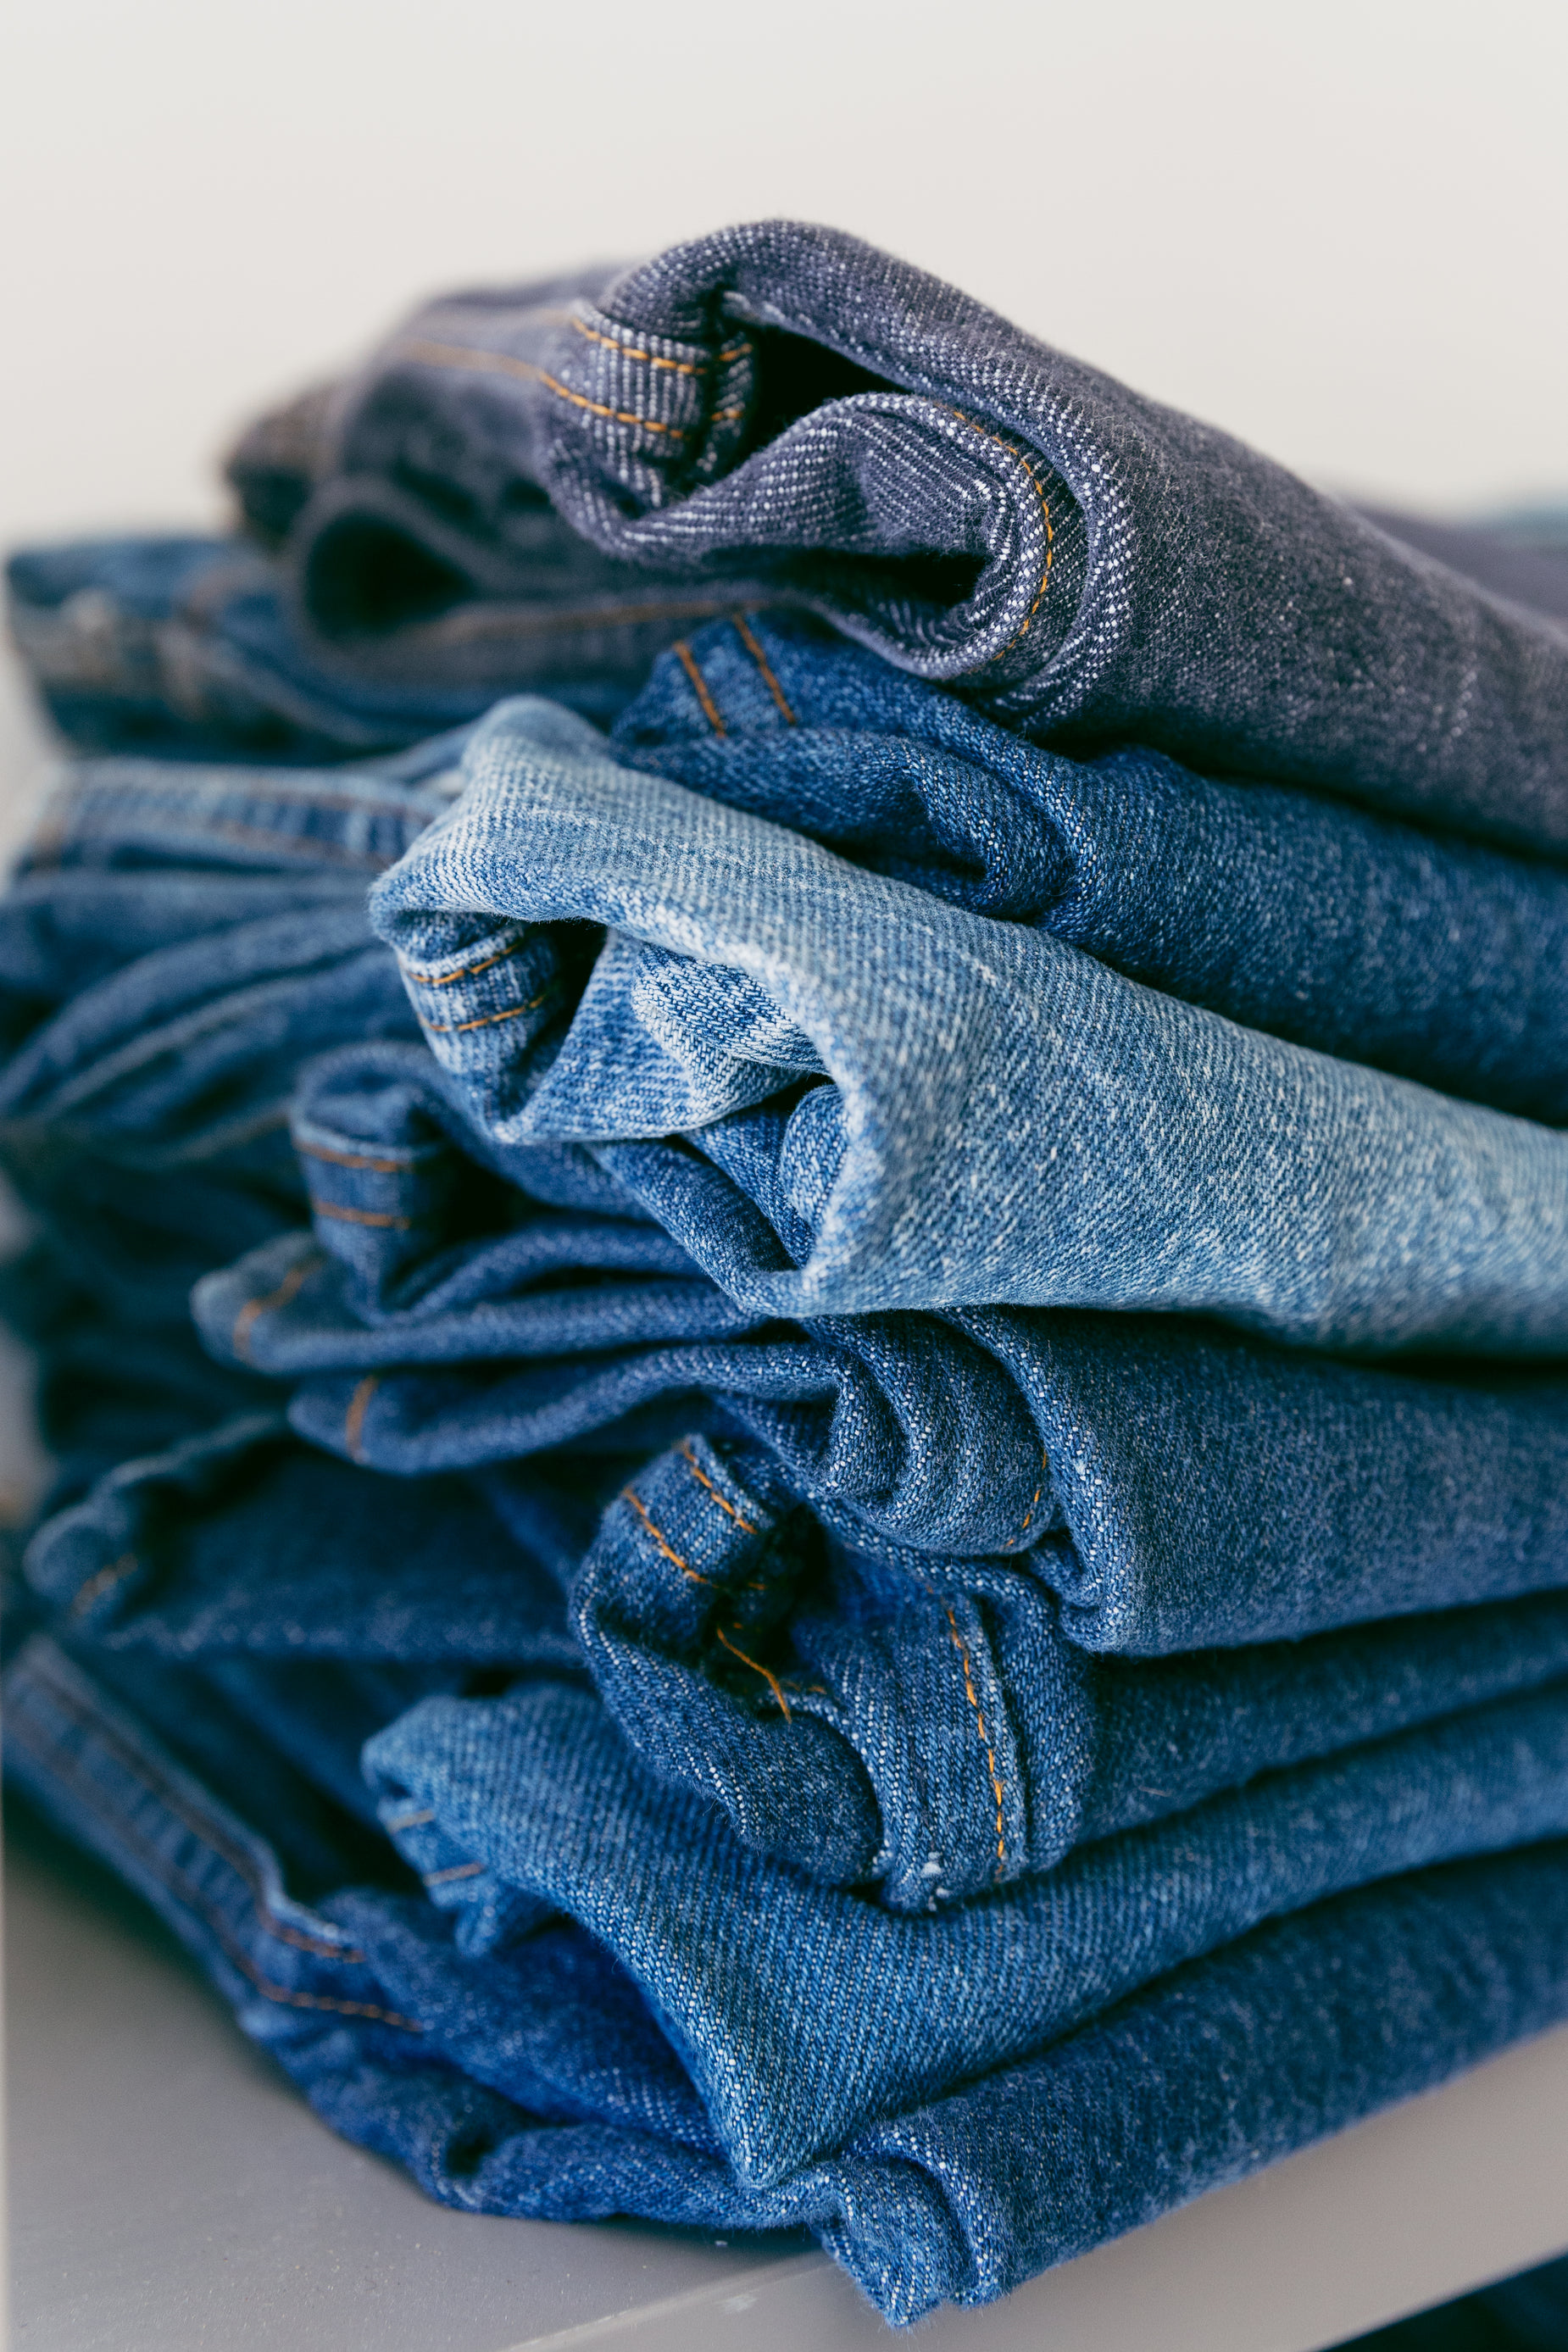 Browse Free HD Images of A Pile Of Denim Jeans In Different Shades Of Blue